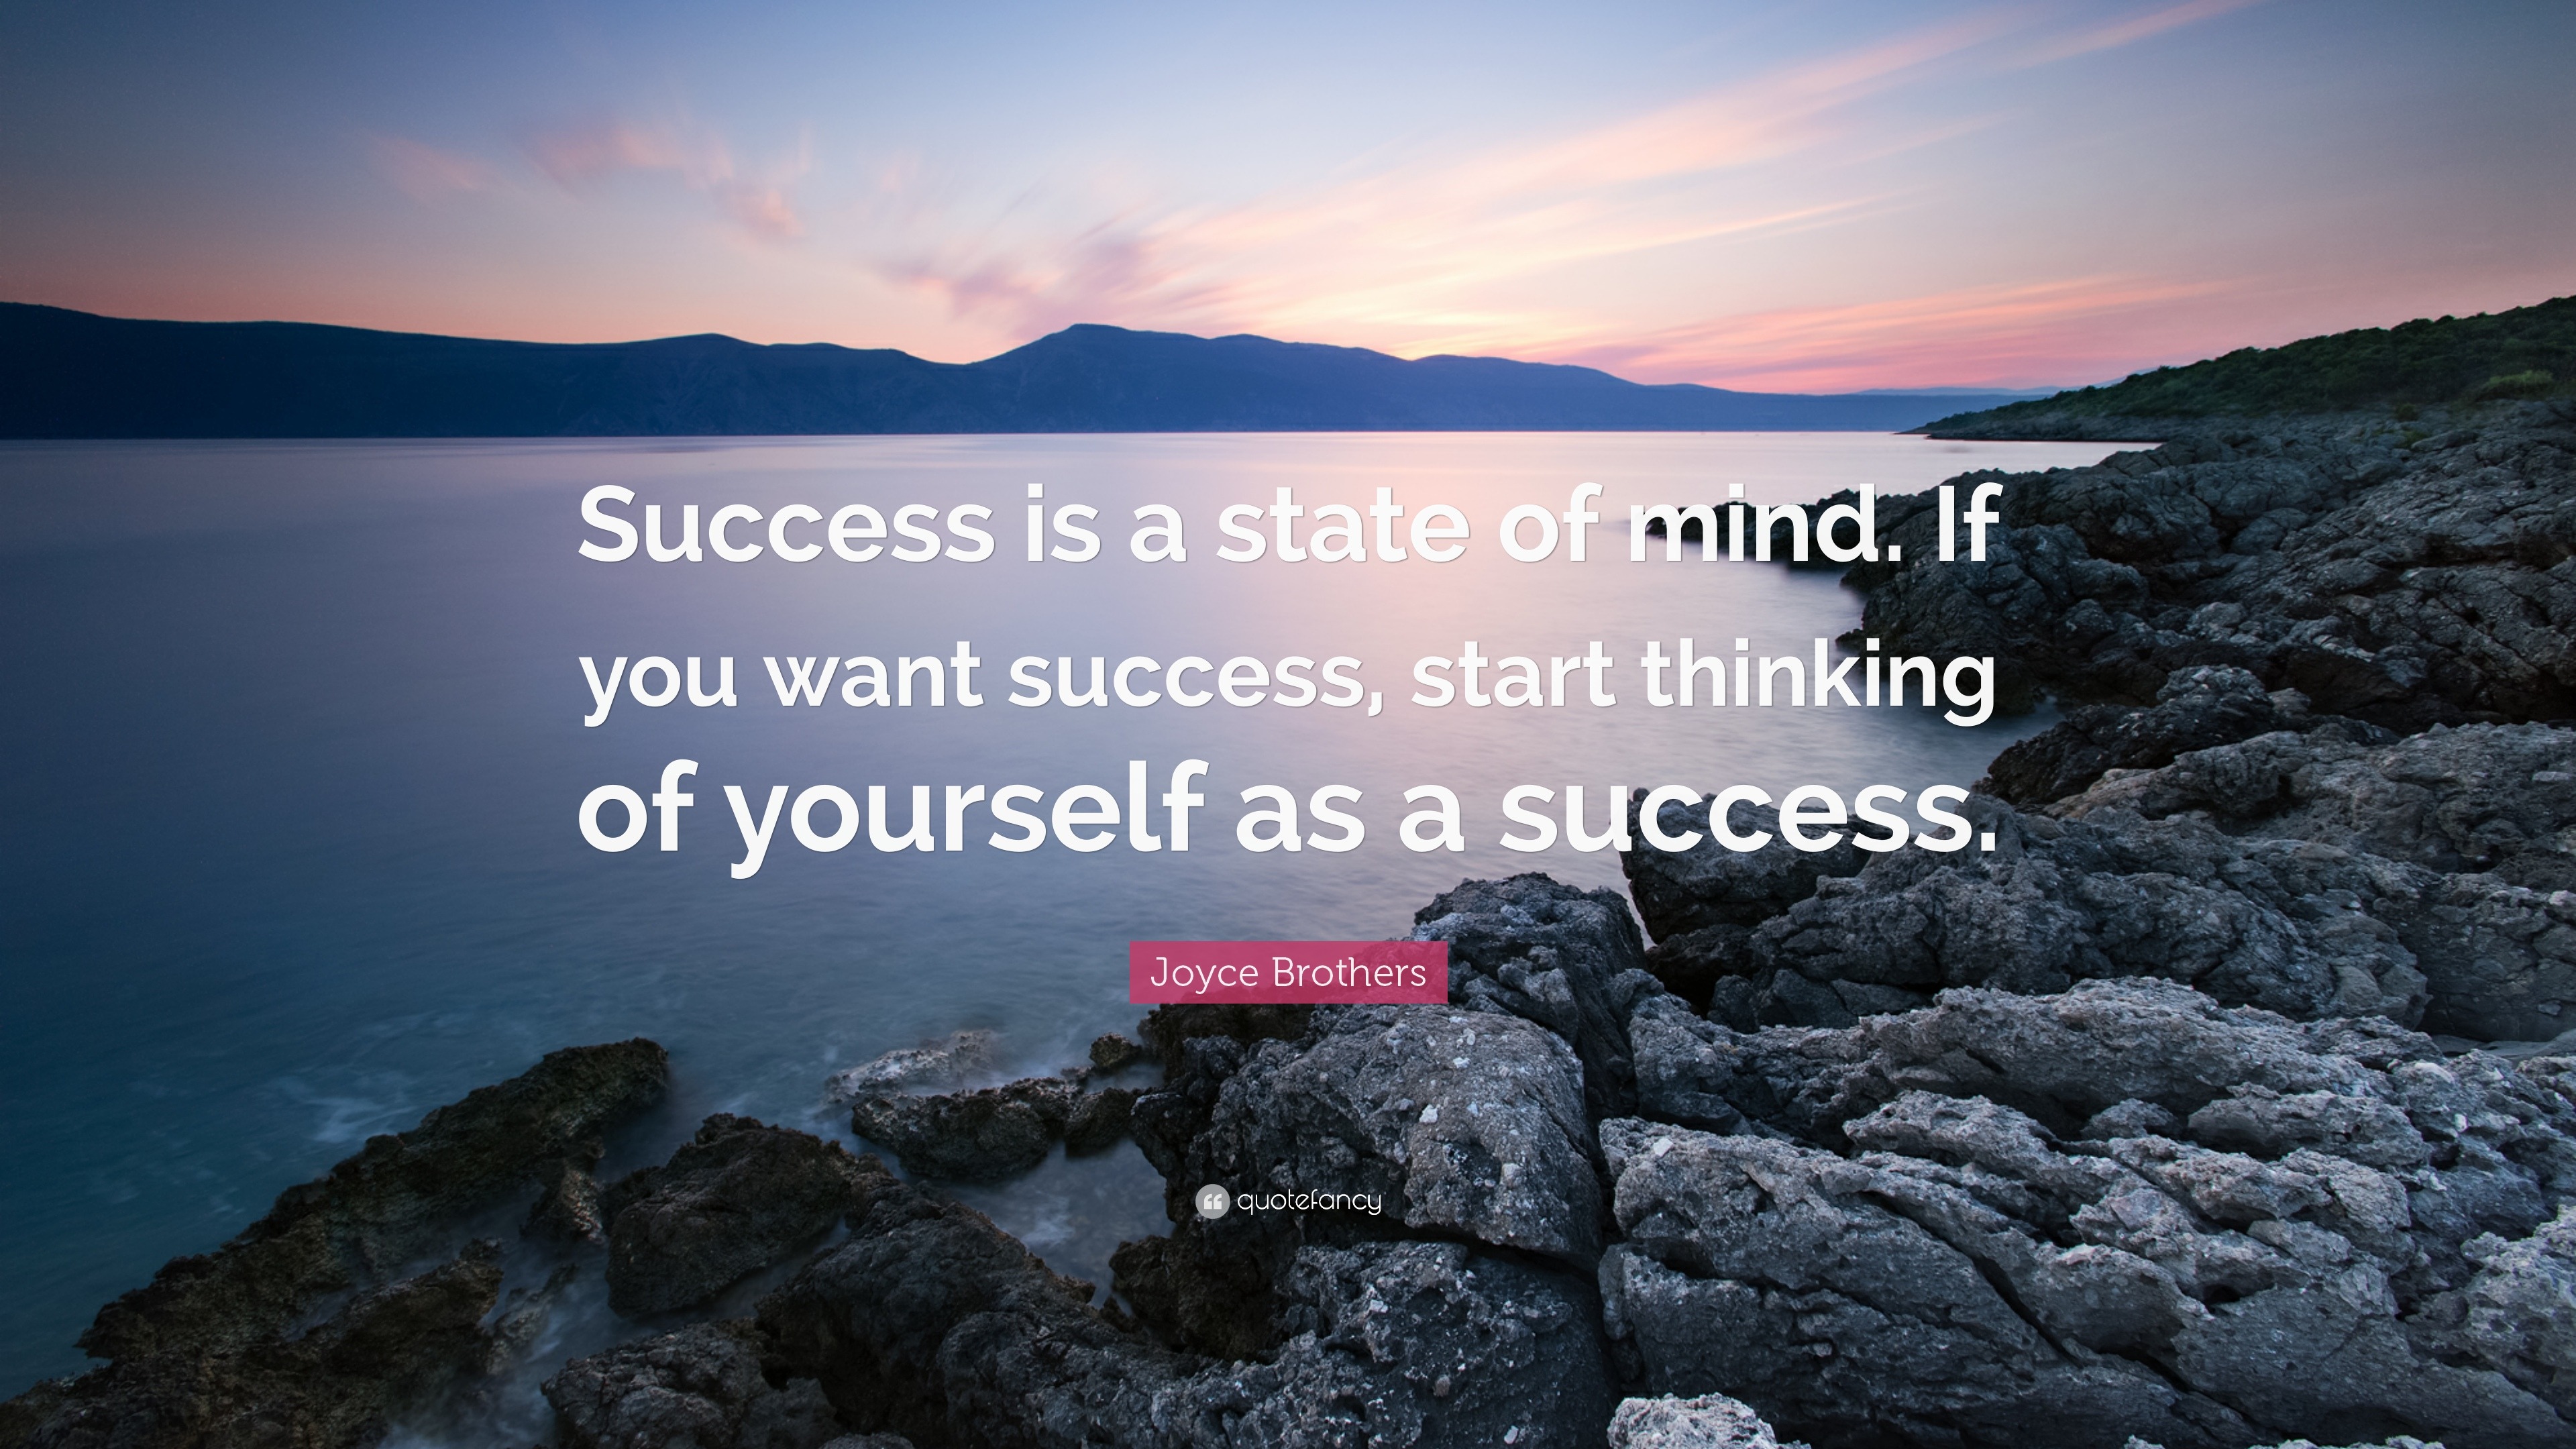 Joyce Brothers - Success is a state of mind. If you want